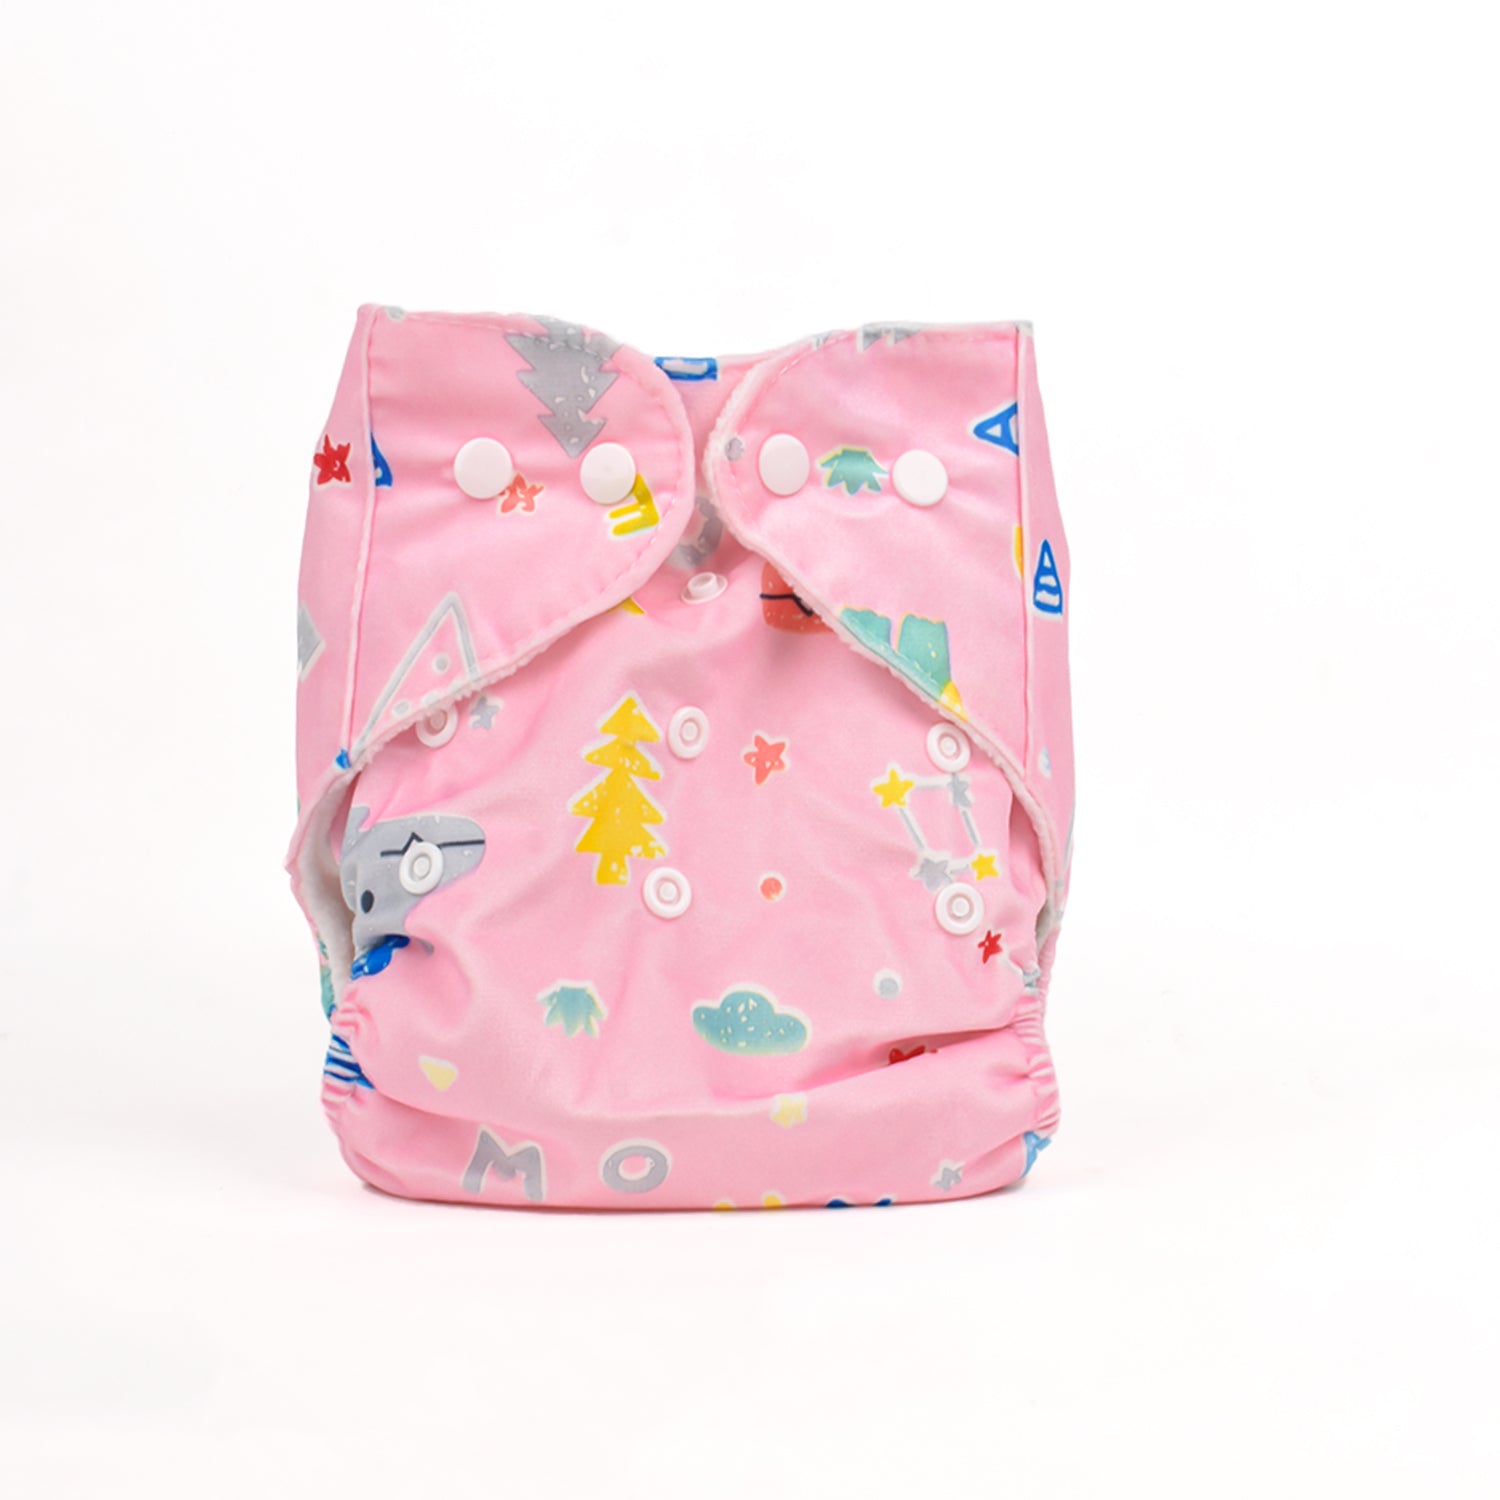 Baby Reusable Cotton Printed Pocket Diapers With 1 Inserts - Pack of 1 Pink Dinosaur